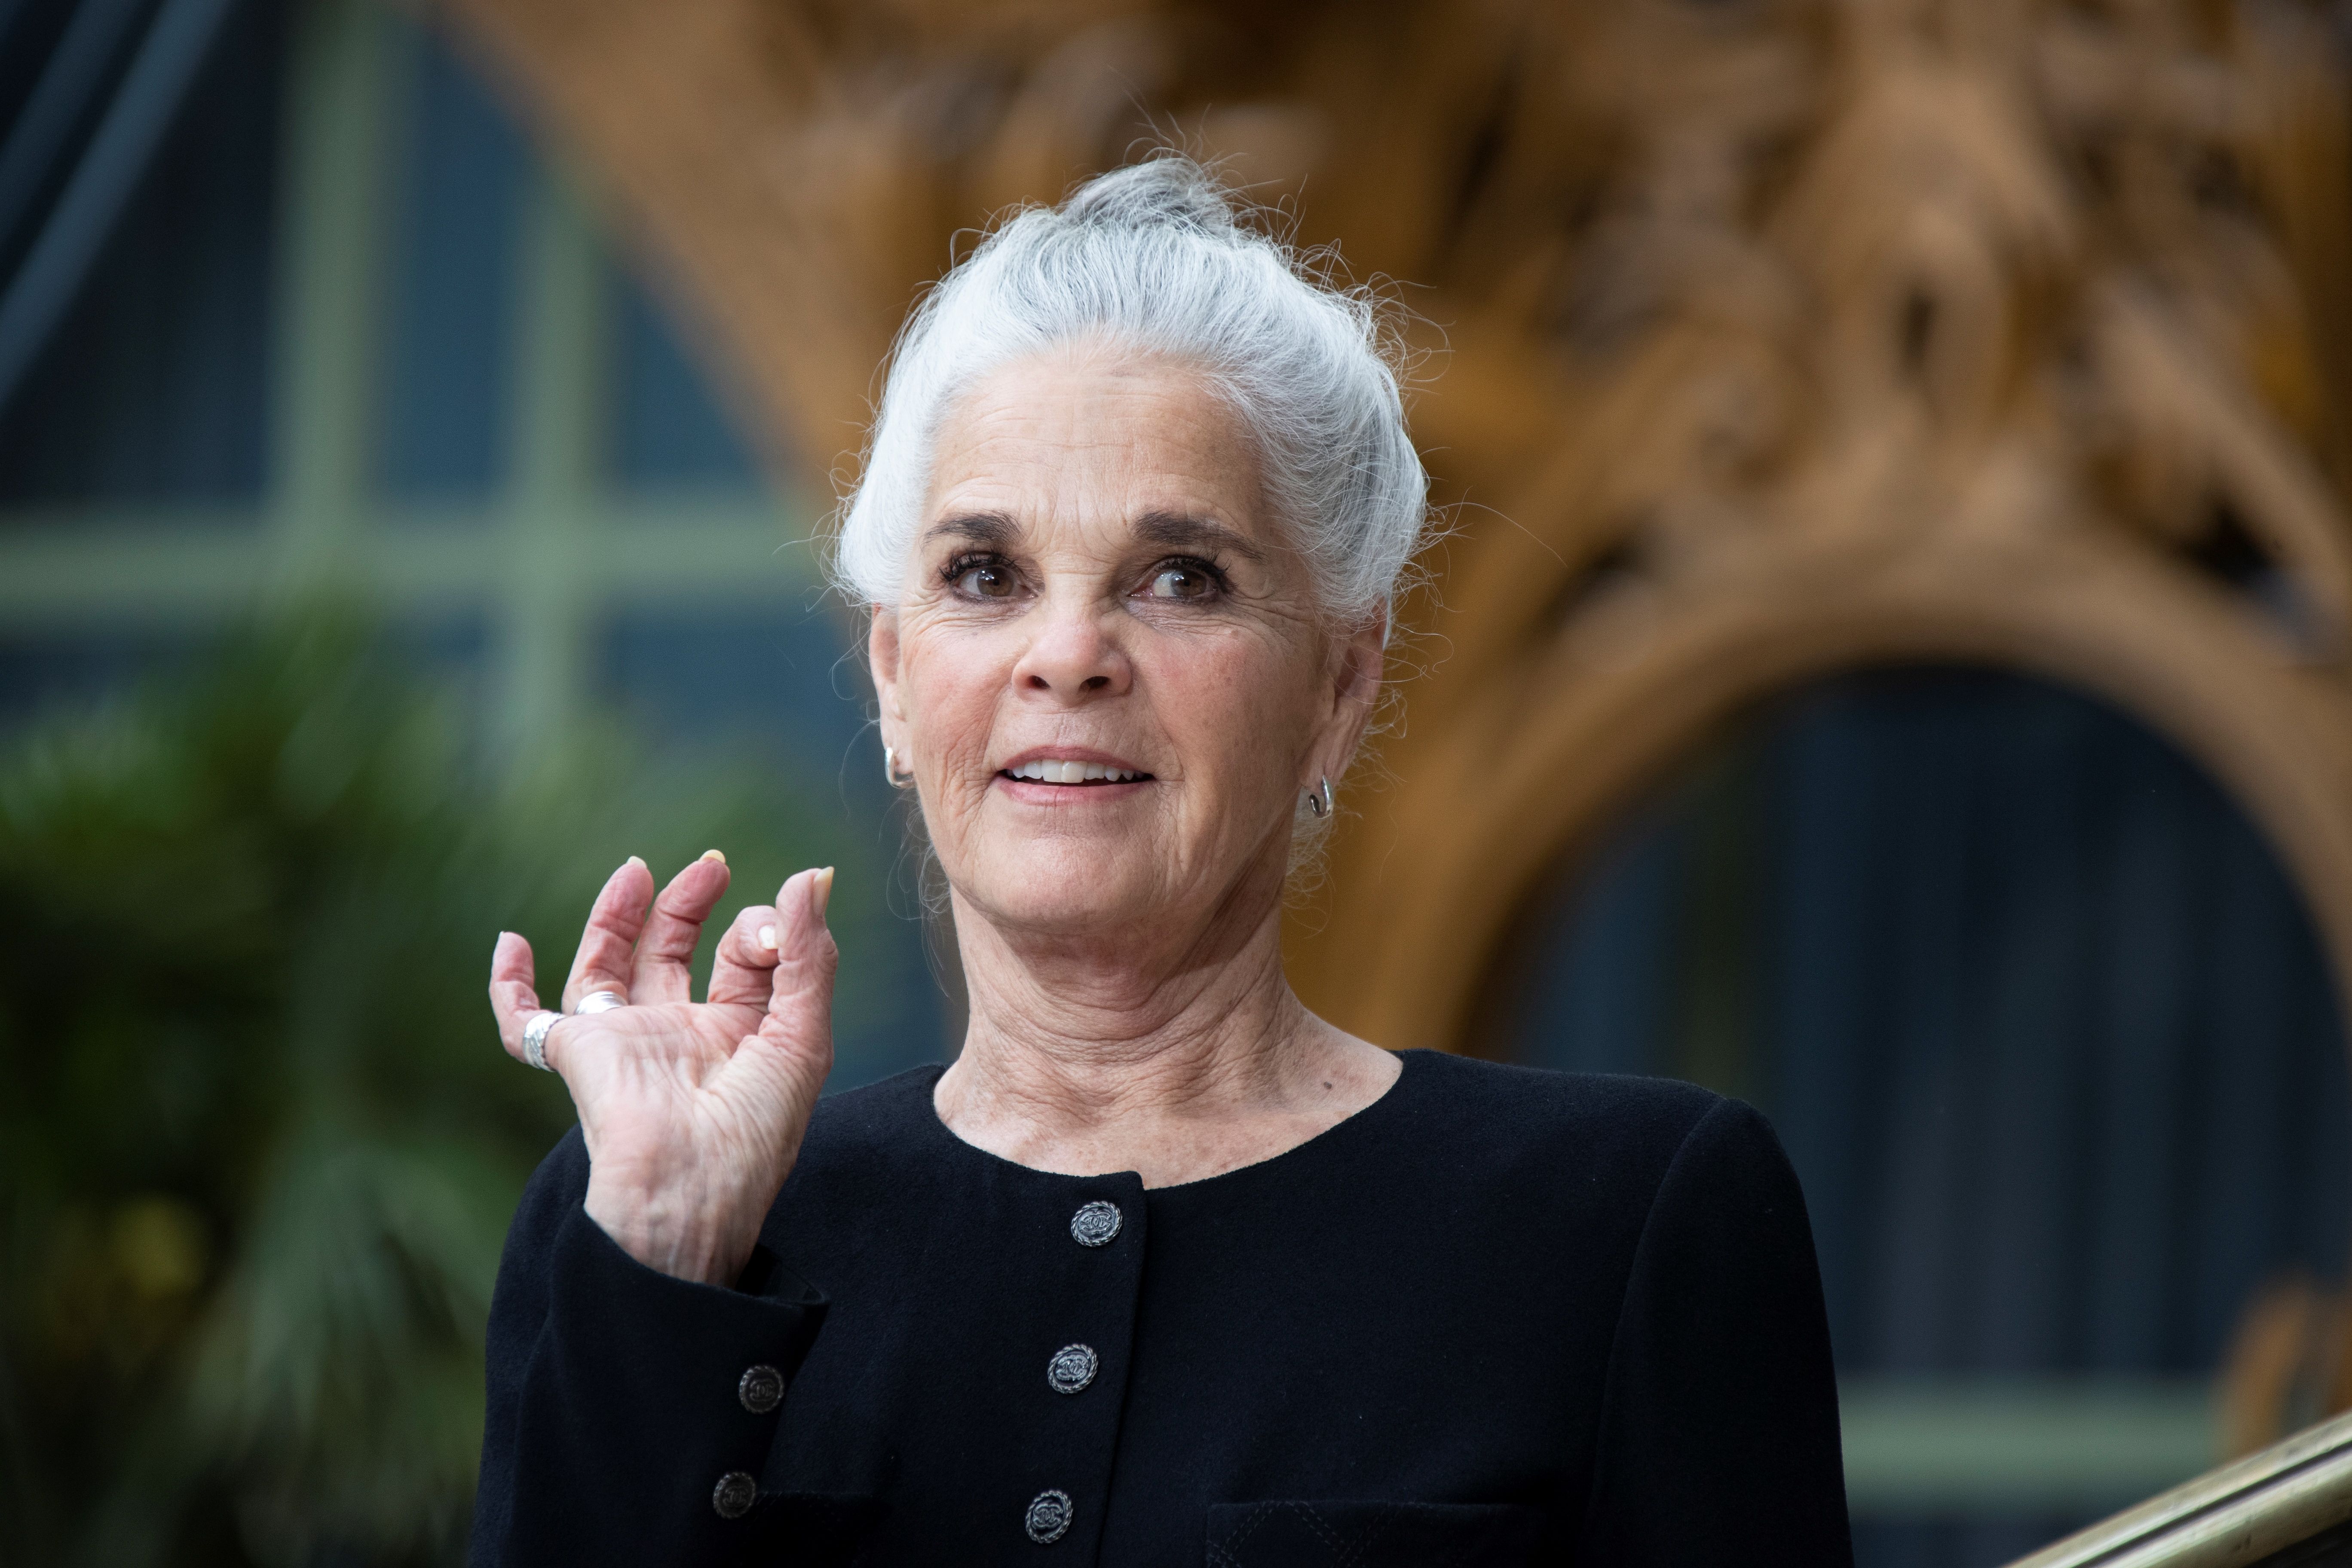 Ali MacGraw at a photocall for the Chanel Cruise 2020 Collection : Photocall In Le Grand Palais on May 03, 2019 in Paris, France | Source: Getty Images